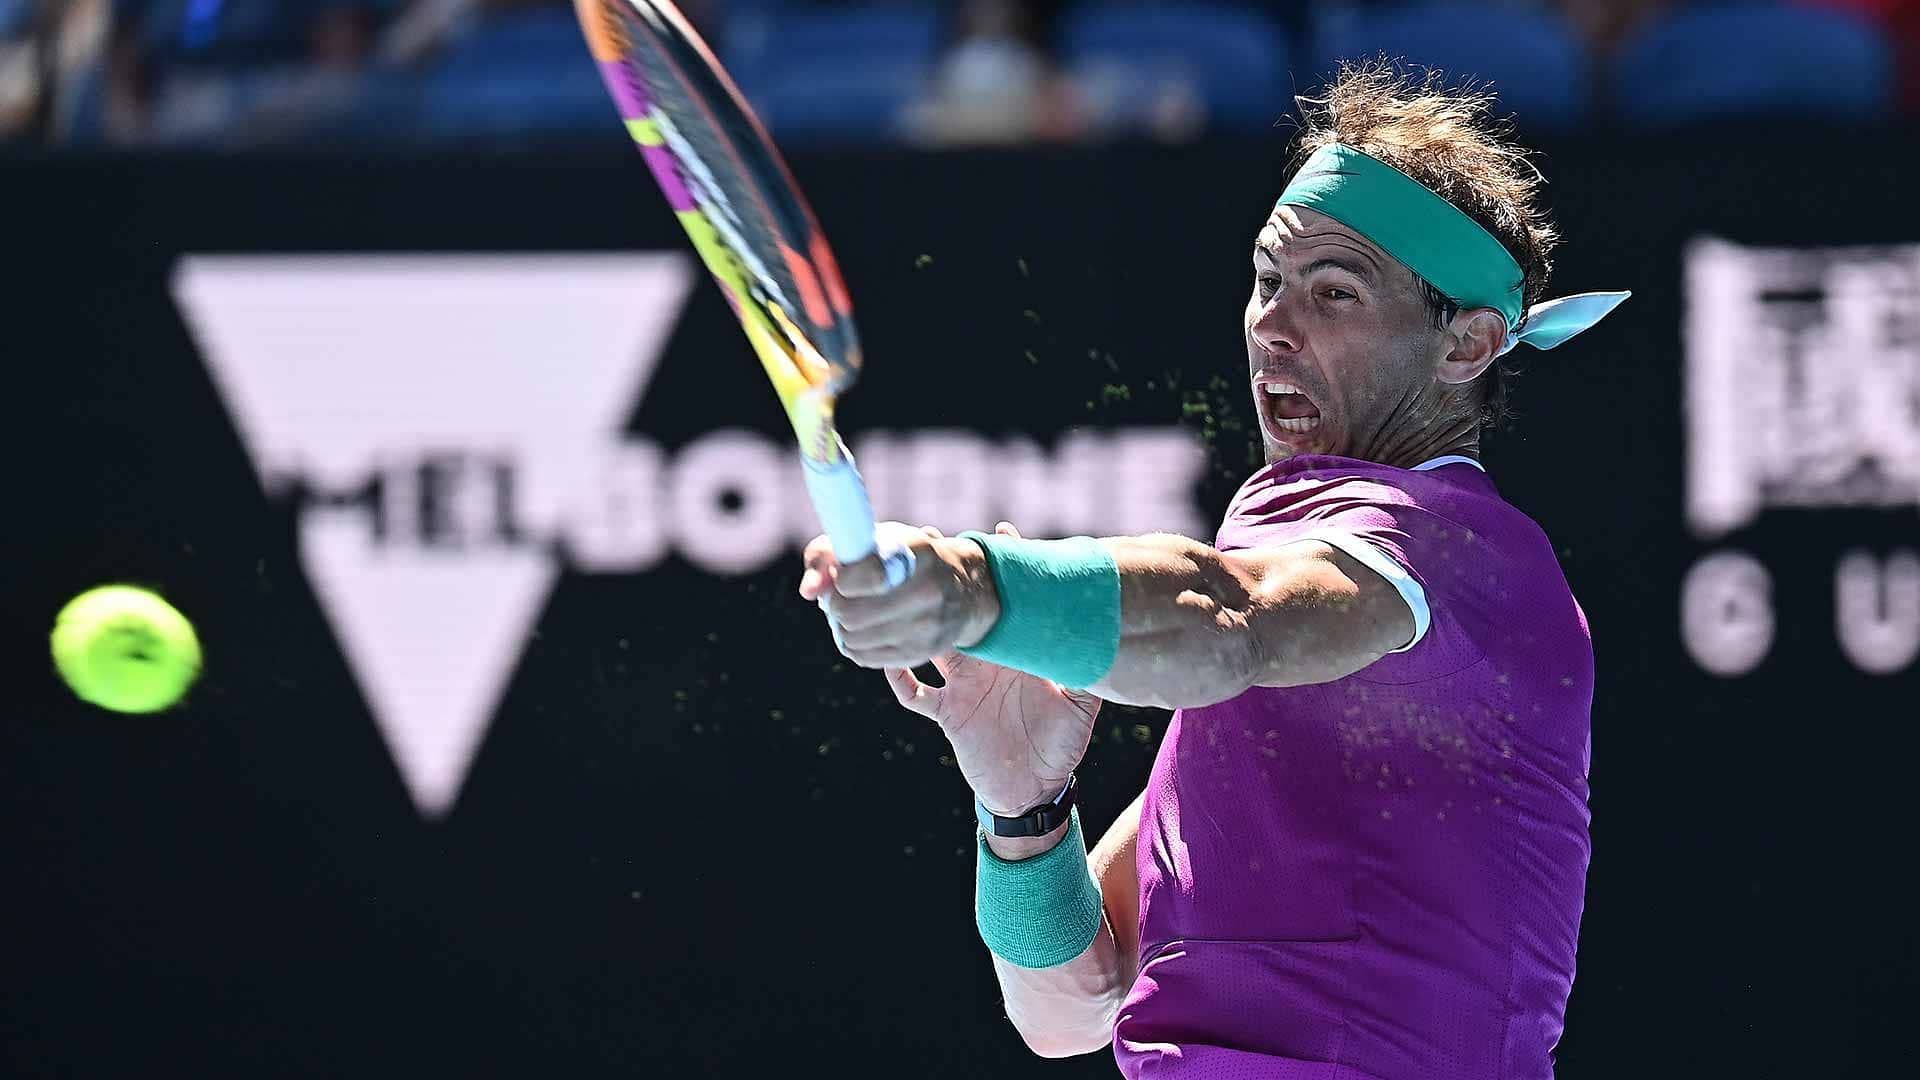 Rafael Nadal plays a forehand at the 2022 Australian Open